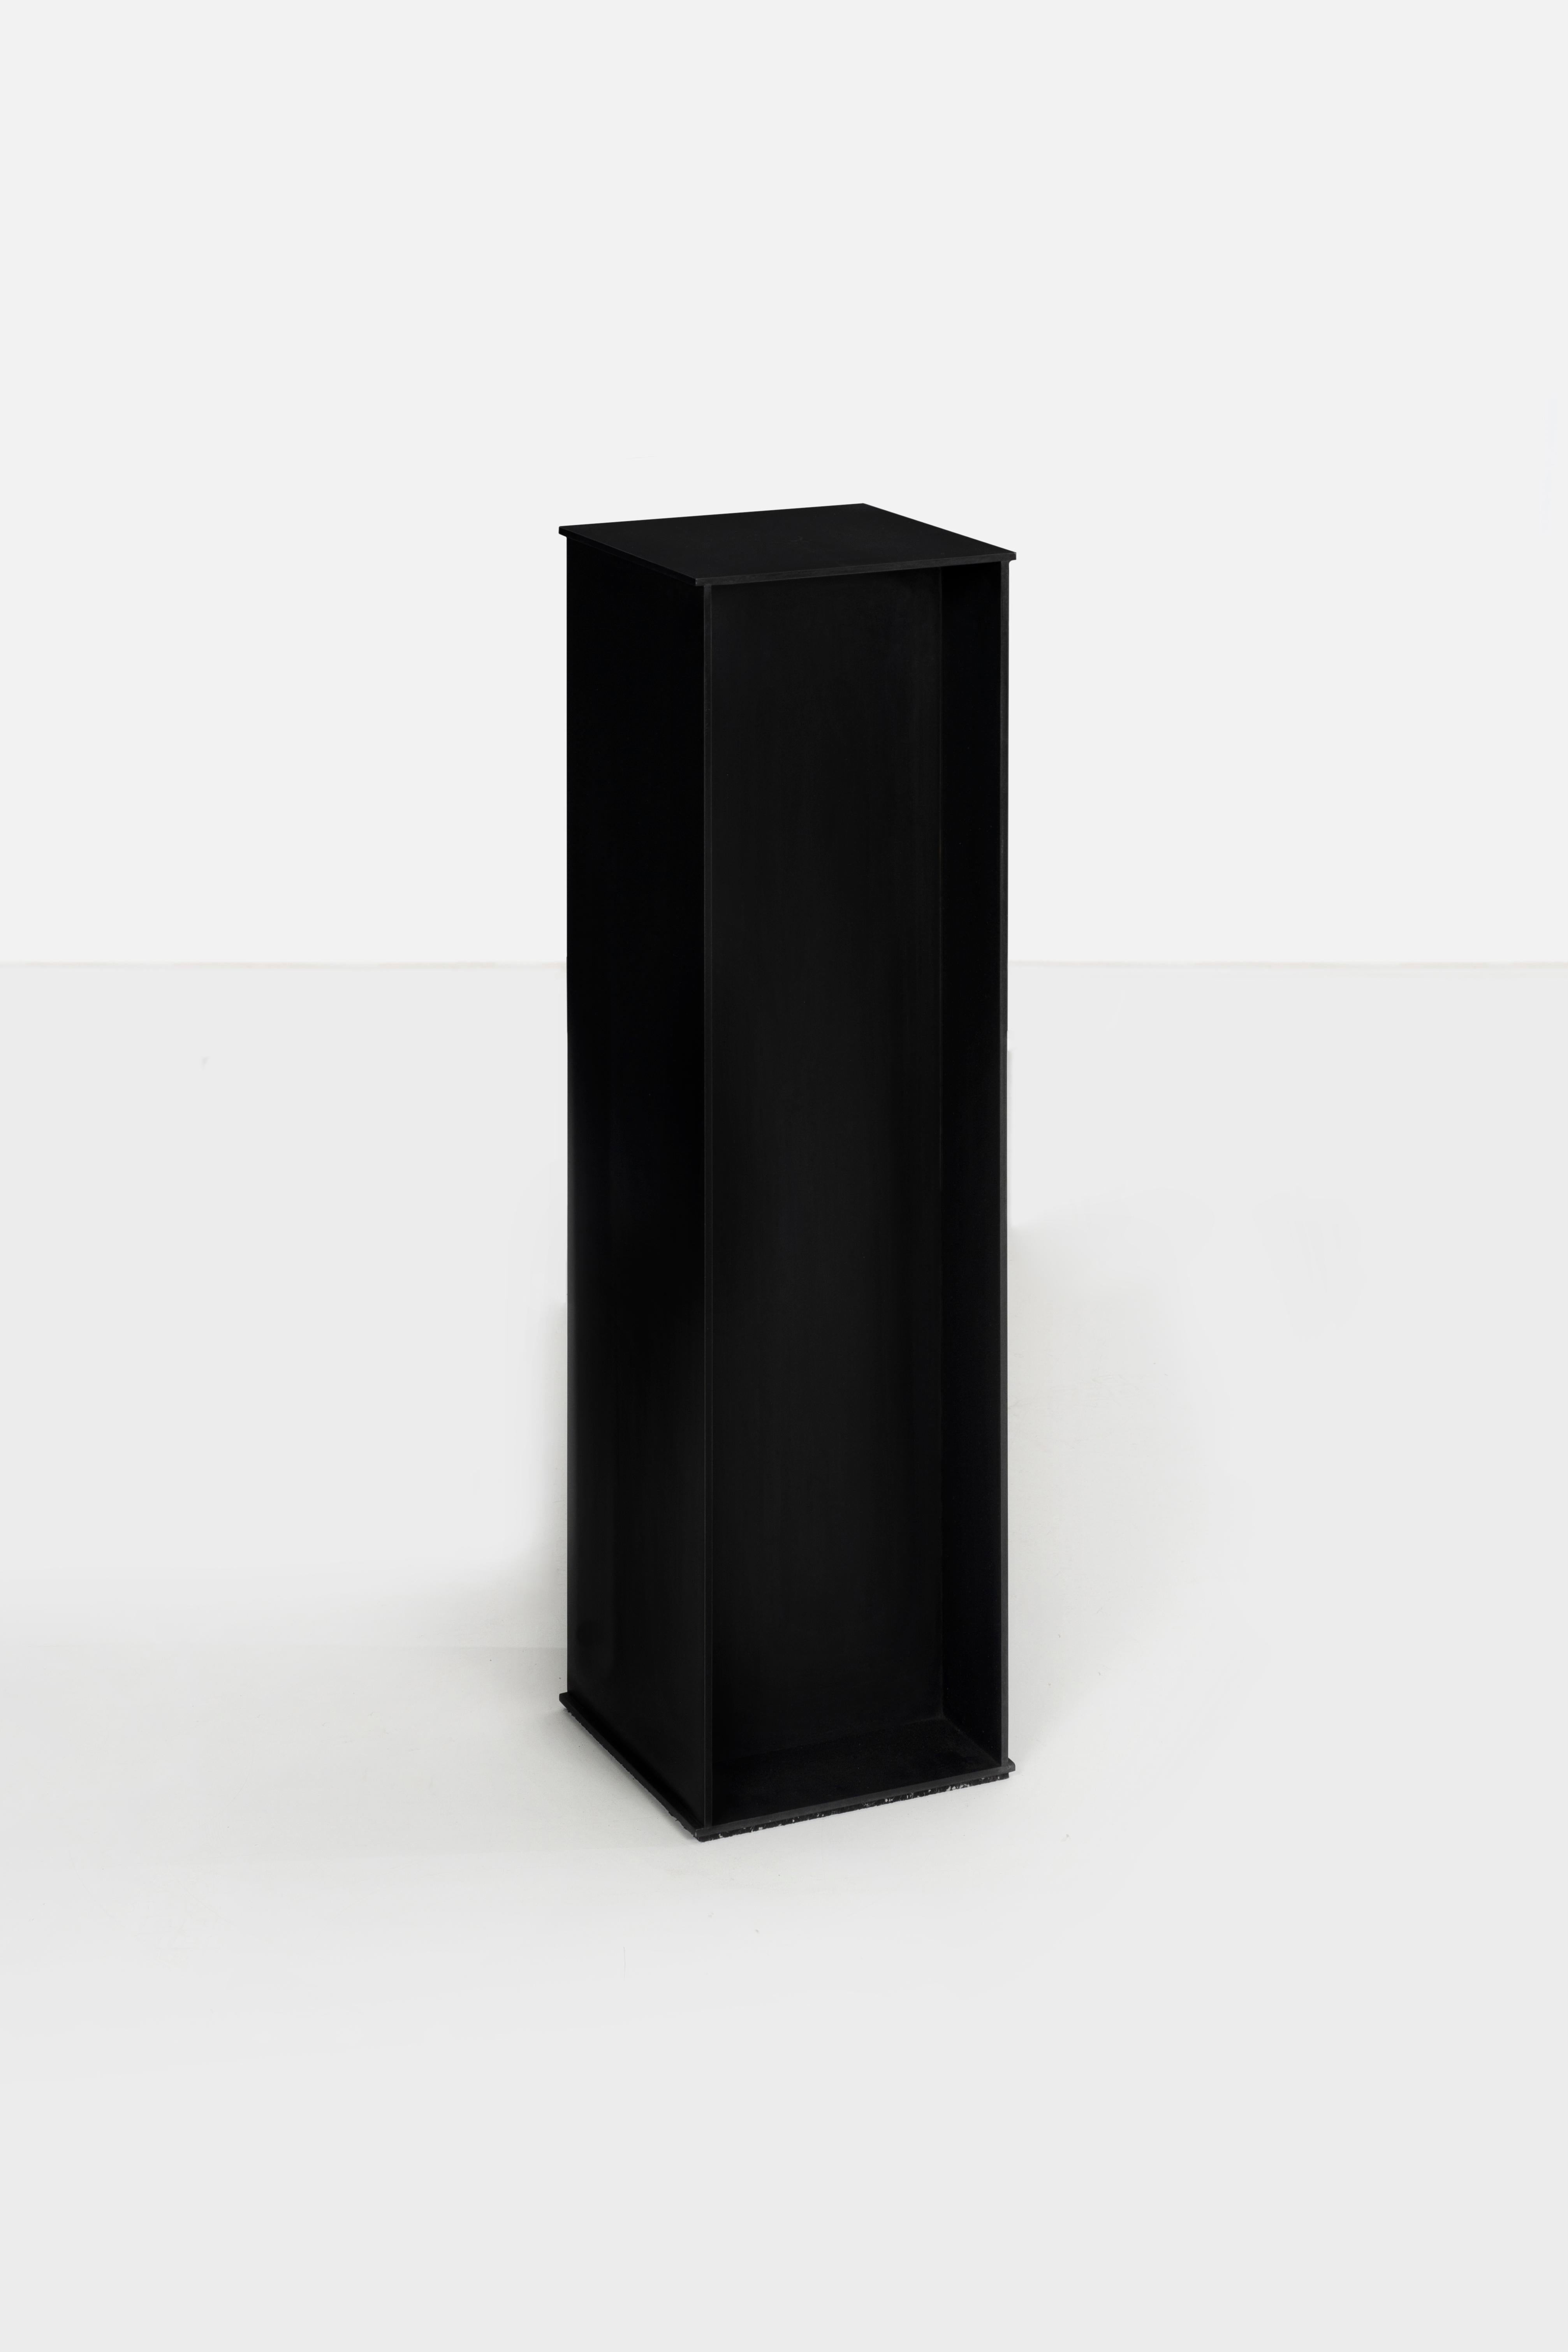 DK Pedestal in .25 inch thick aluminum plate that has been chemically blackened and waxed with black wax. Digitally cut aluminum plates are precisely welded and finished. The pedestal has a digitally-cut rubber recessed footpad.